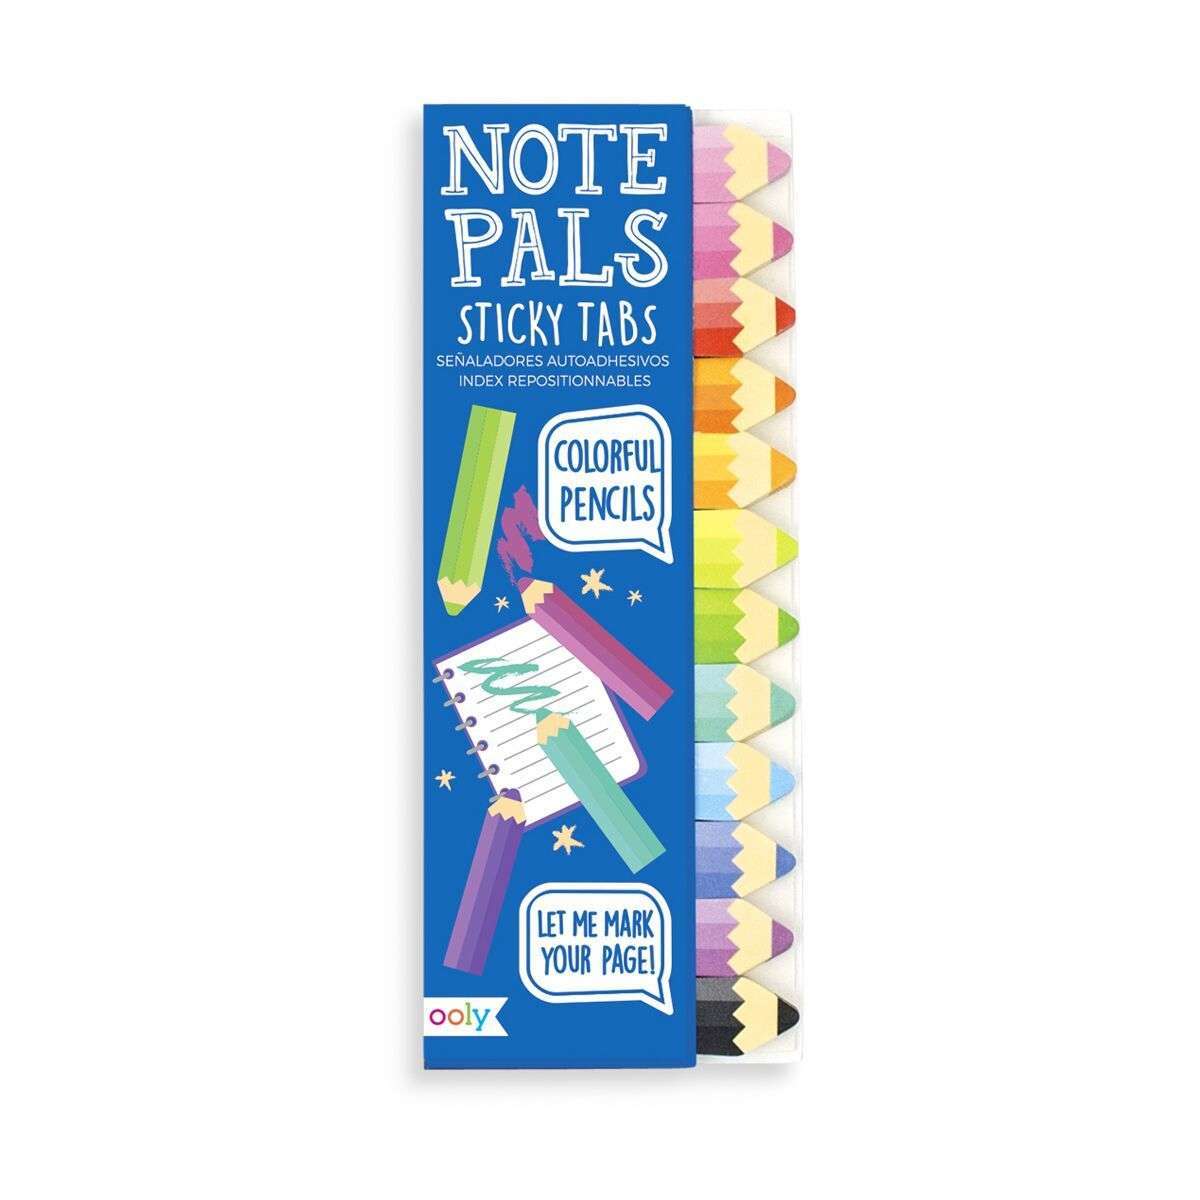 Note Pals Sticky Tabs - Colourful Pencils - 120 tabs:Primary Classroom Resources